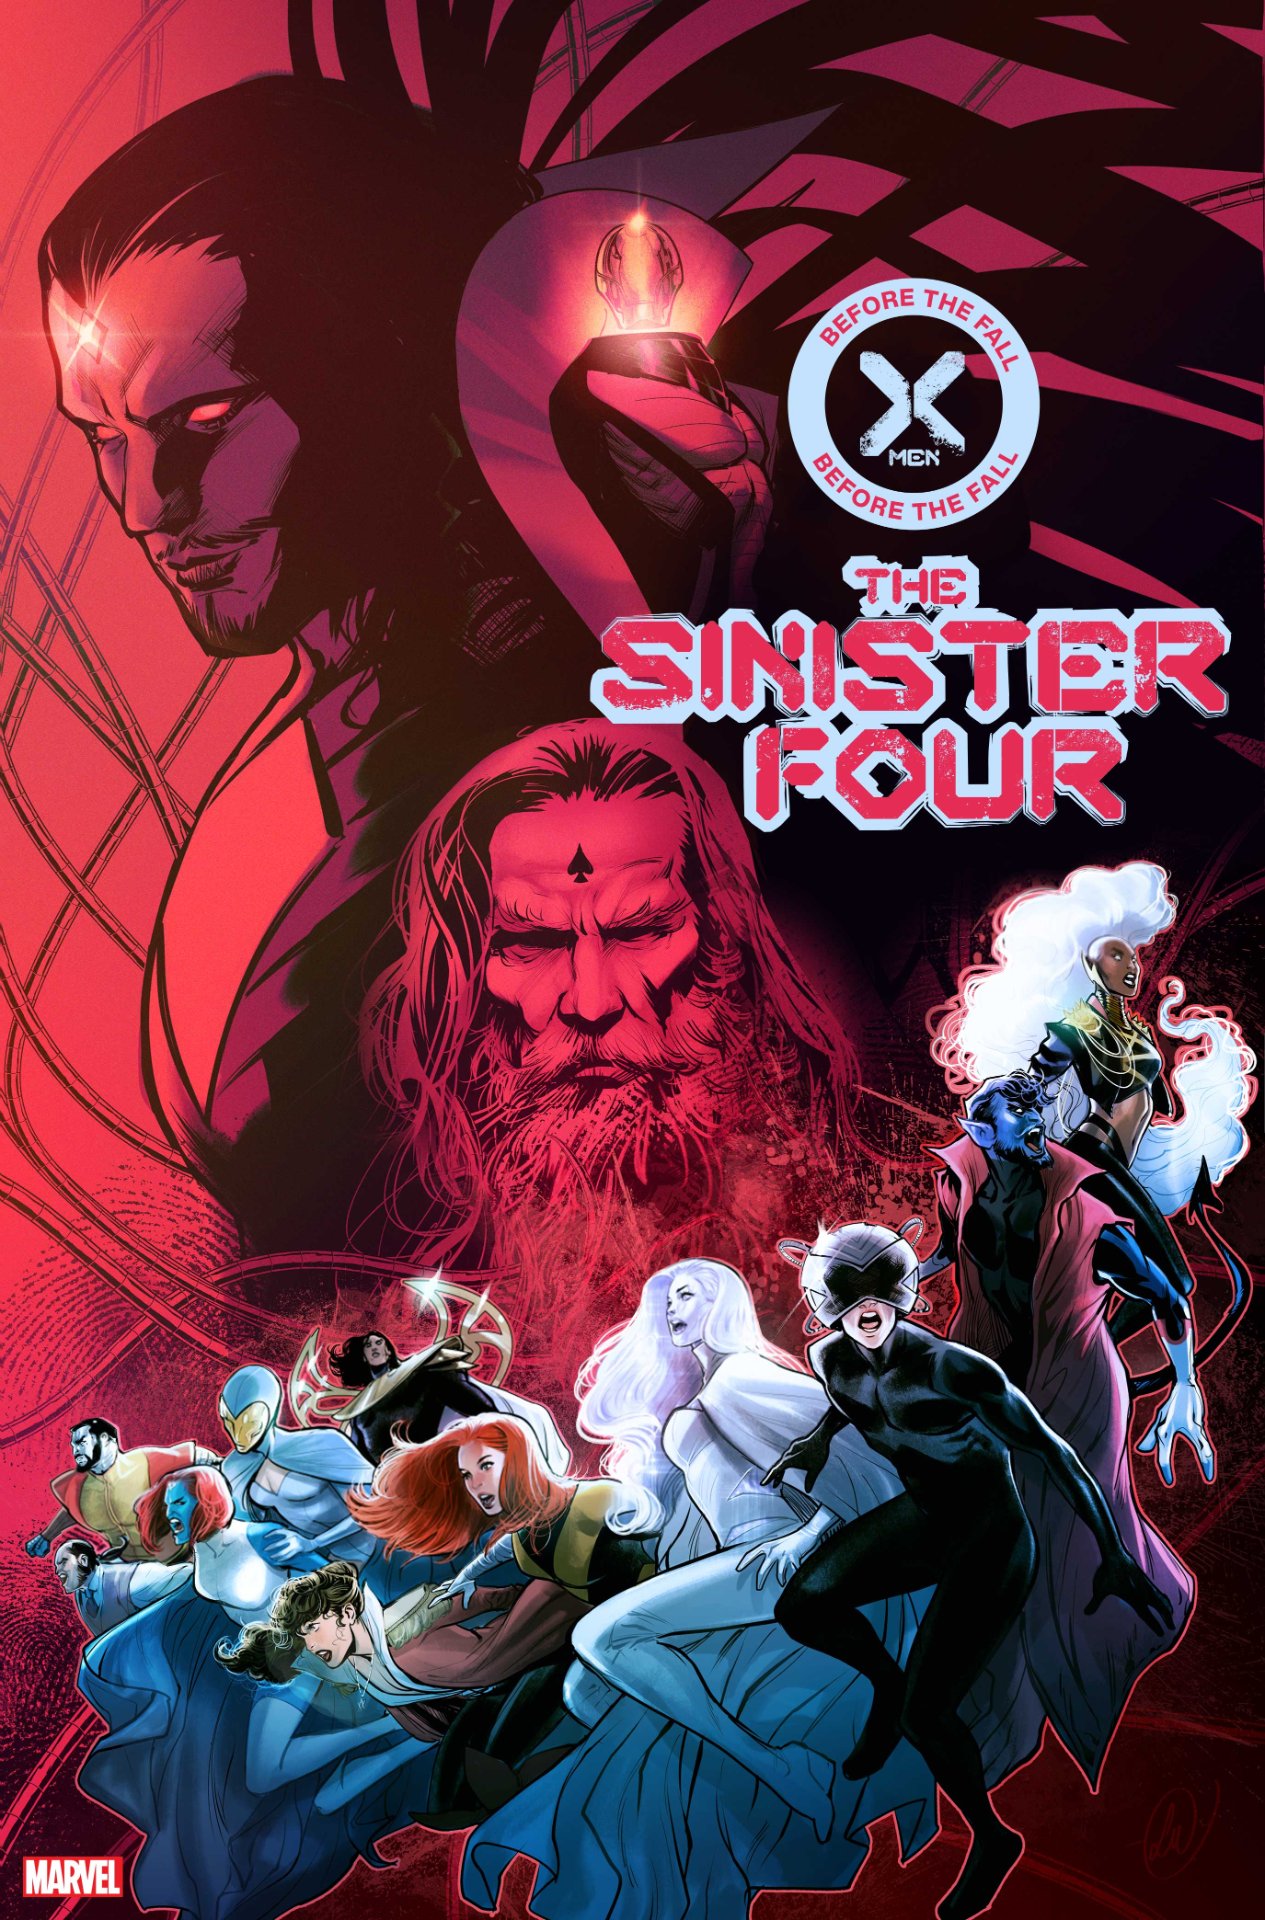 X-Men: Before The Fall - Sinister Four #1 Cover